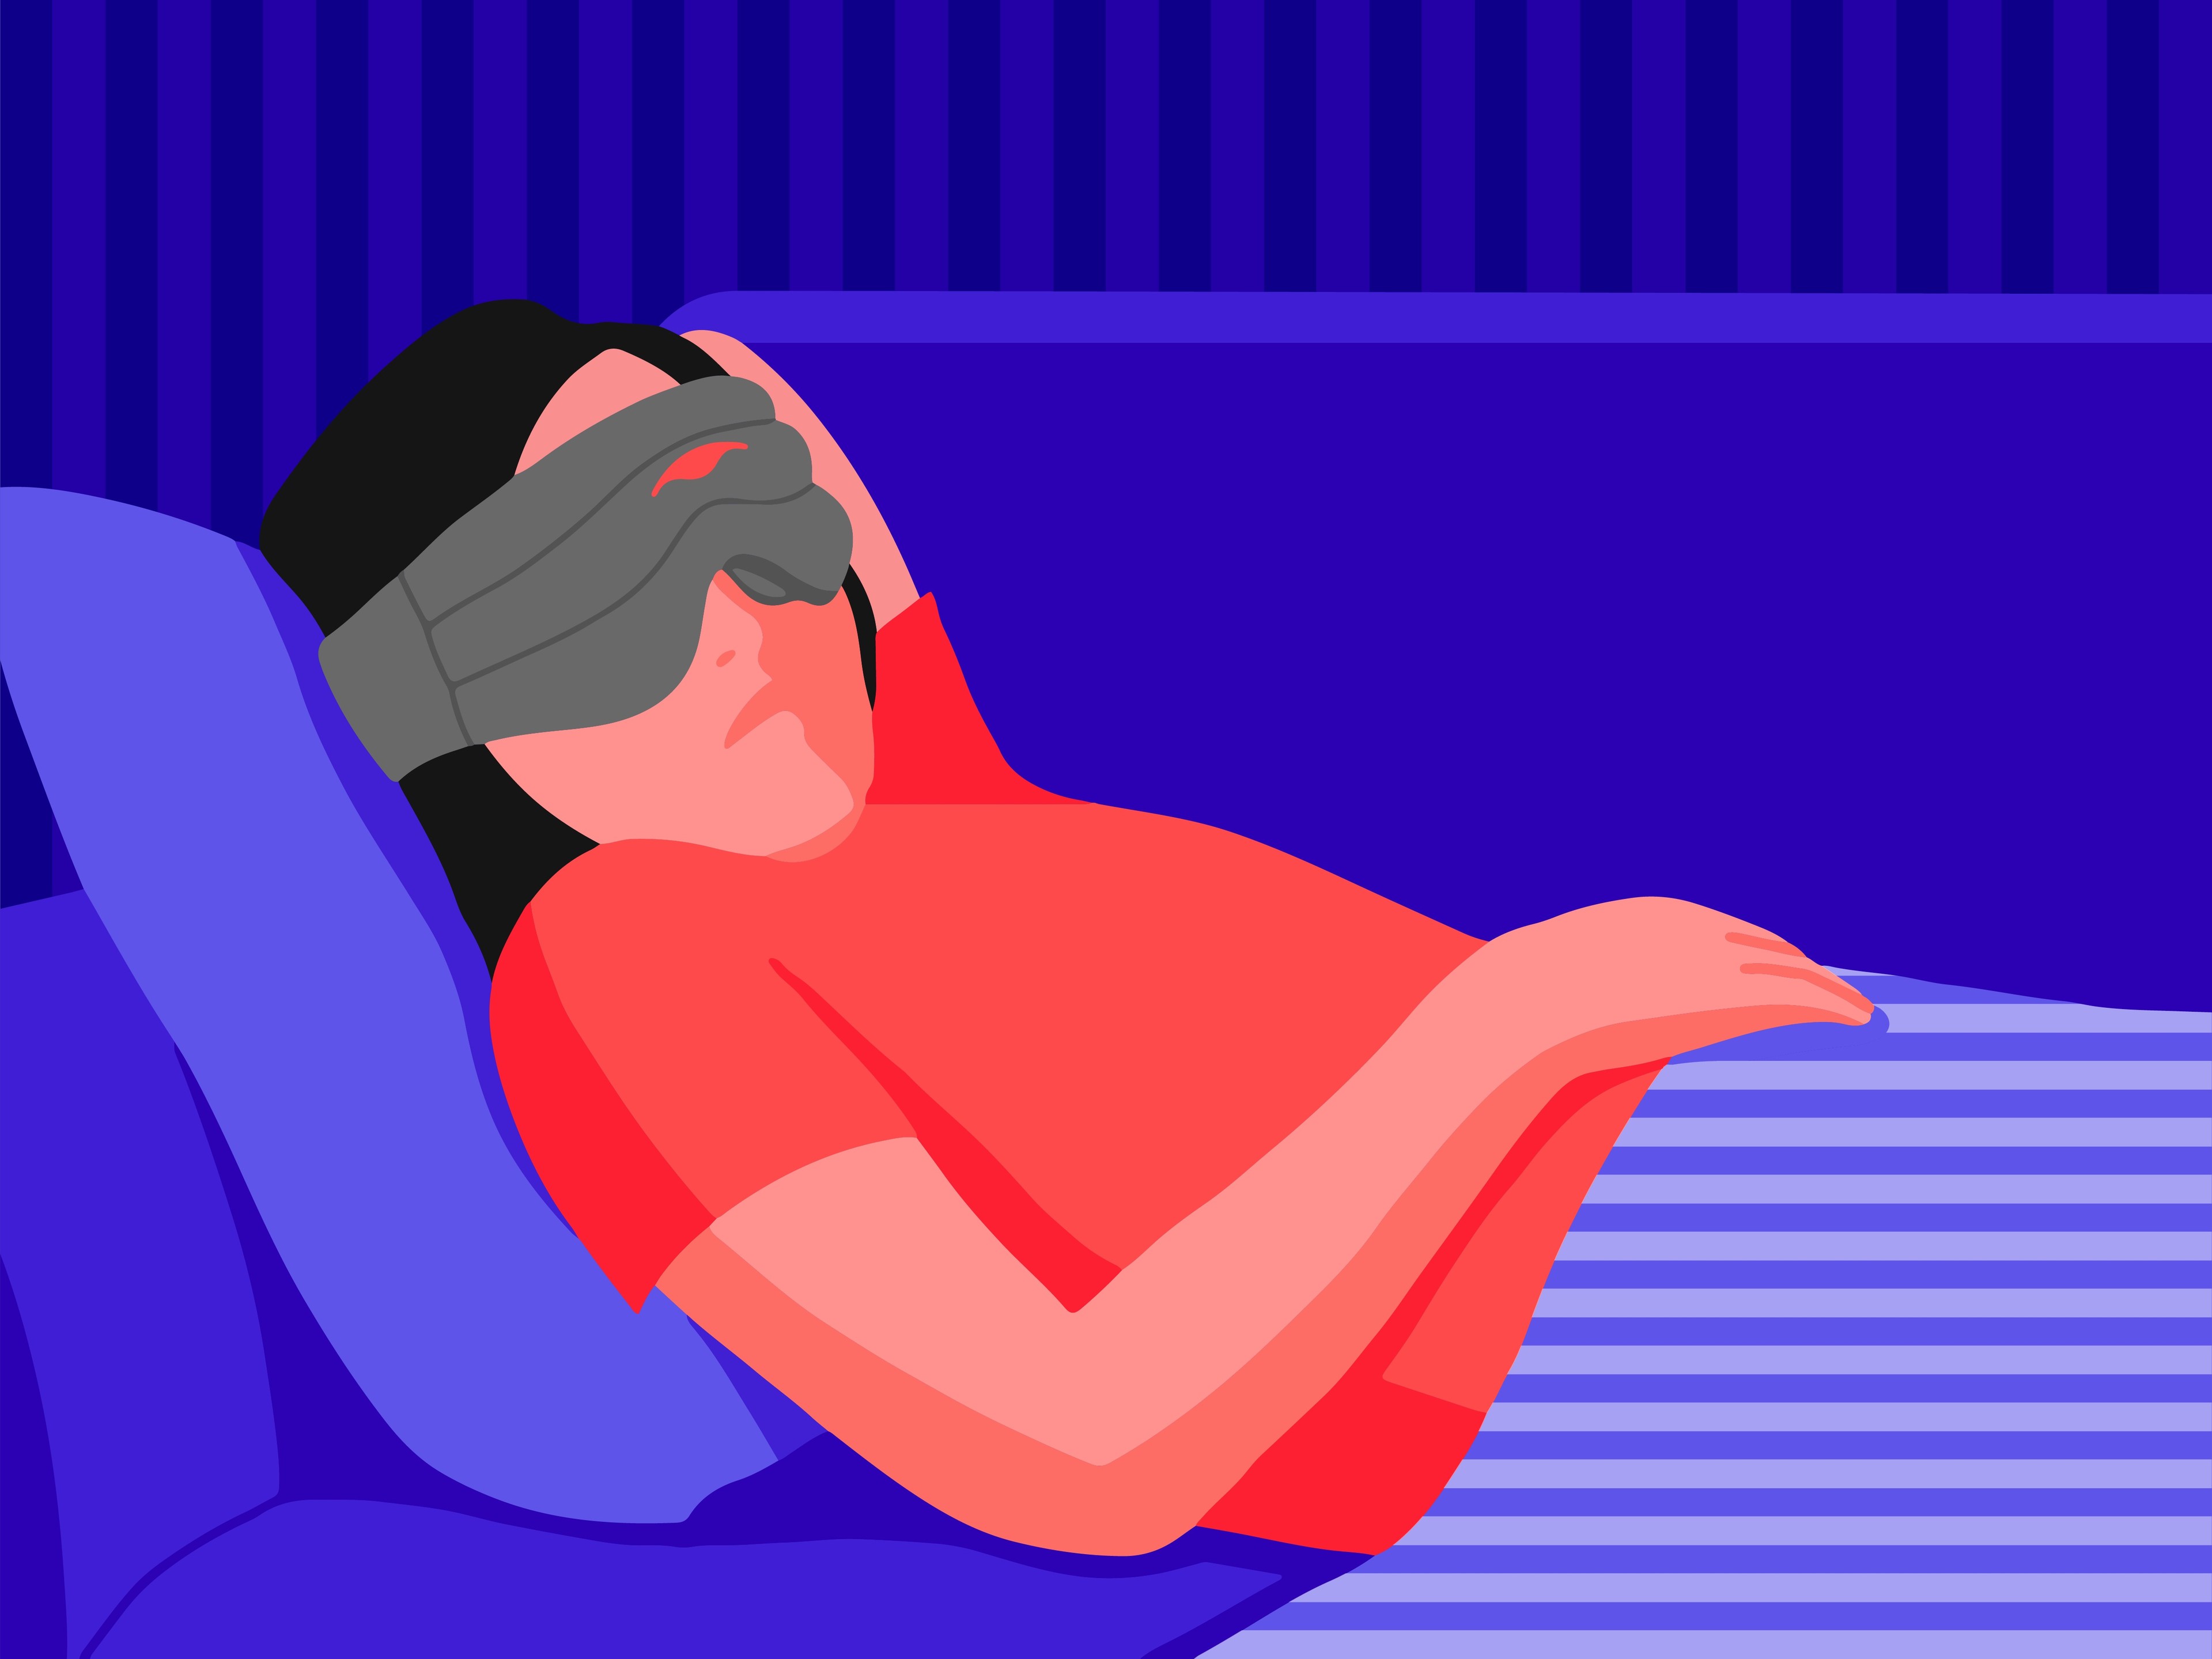 A girl wearing a weighted sleep mask while napping on a couch.